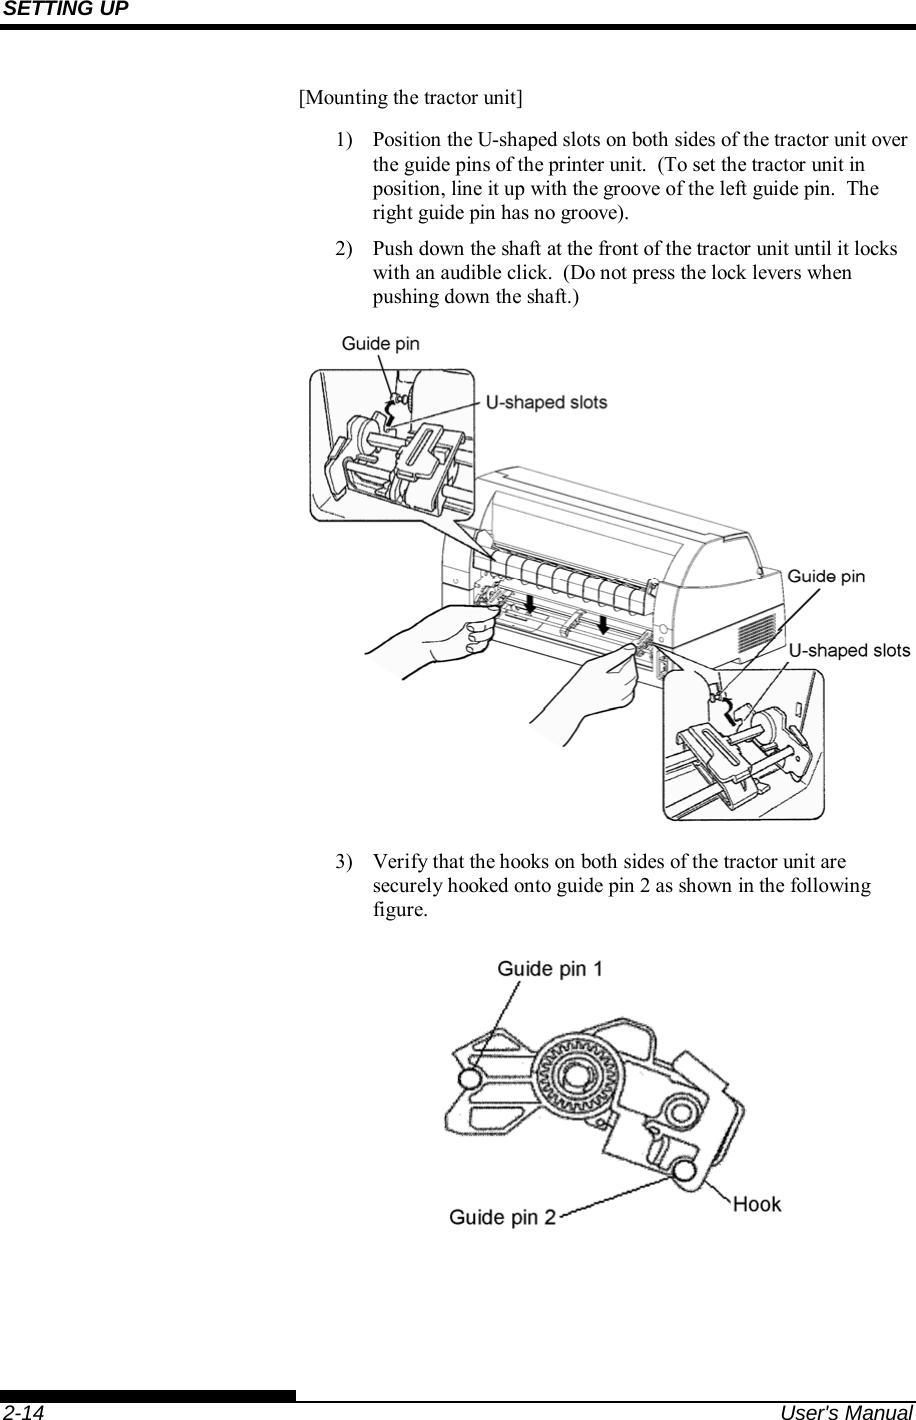 SETTING UP    2-14  User&apos;s Manual [Mounting the tractor unit] 1)  Position the U-shaped slots on both sides of the tractor unit over the guide pins of the printer unit.  (To set the tractor unit in position, line it up with the groove of the left guide pin.  The right guide pin has no groove). 2)  Push down the shaft at the front of the tractor unit until it locks with an audible click.  (Do not press the lock levers when pushing down the shaft.)  3)  Verify that the hooks on both sides of the tractor unit are securely hooked onto guide pin 2 as shown in the following figure.   